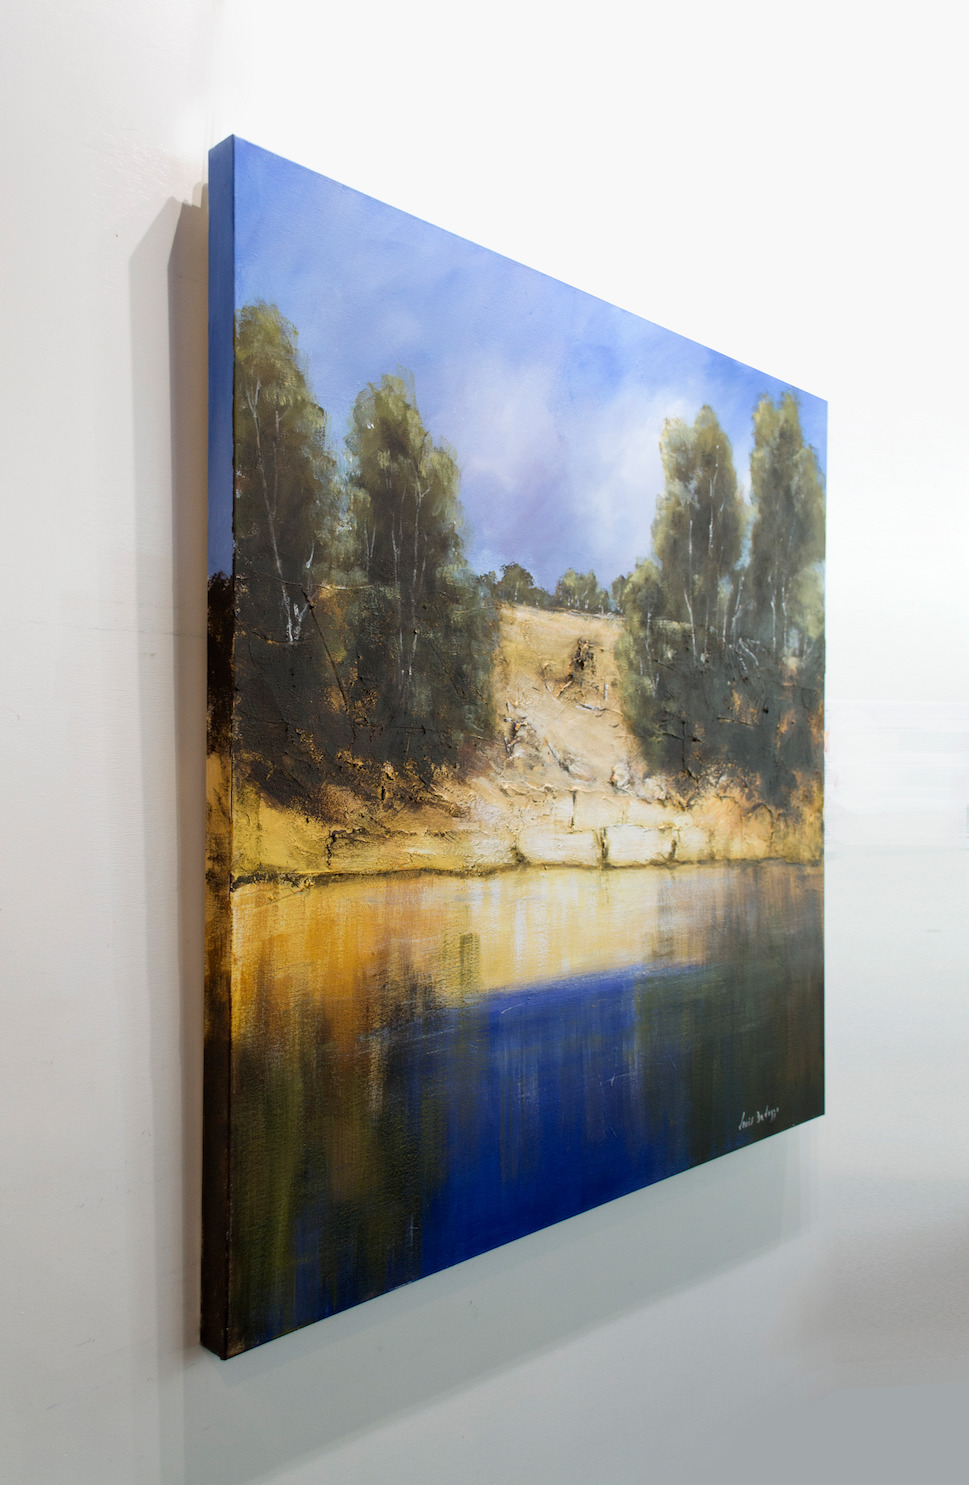 Side View Of Landscape Painting "Reflections in Carnarvon Creek" By Louis Dalozzo